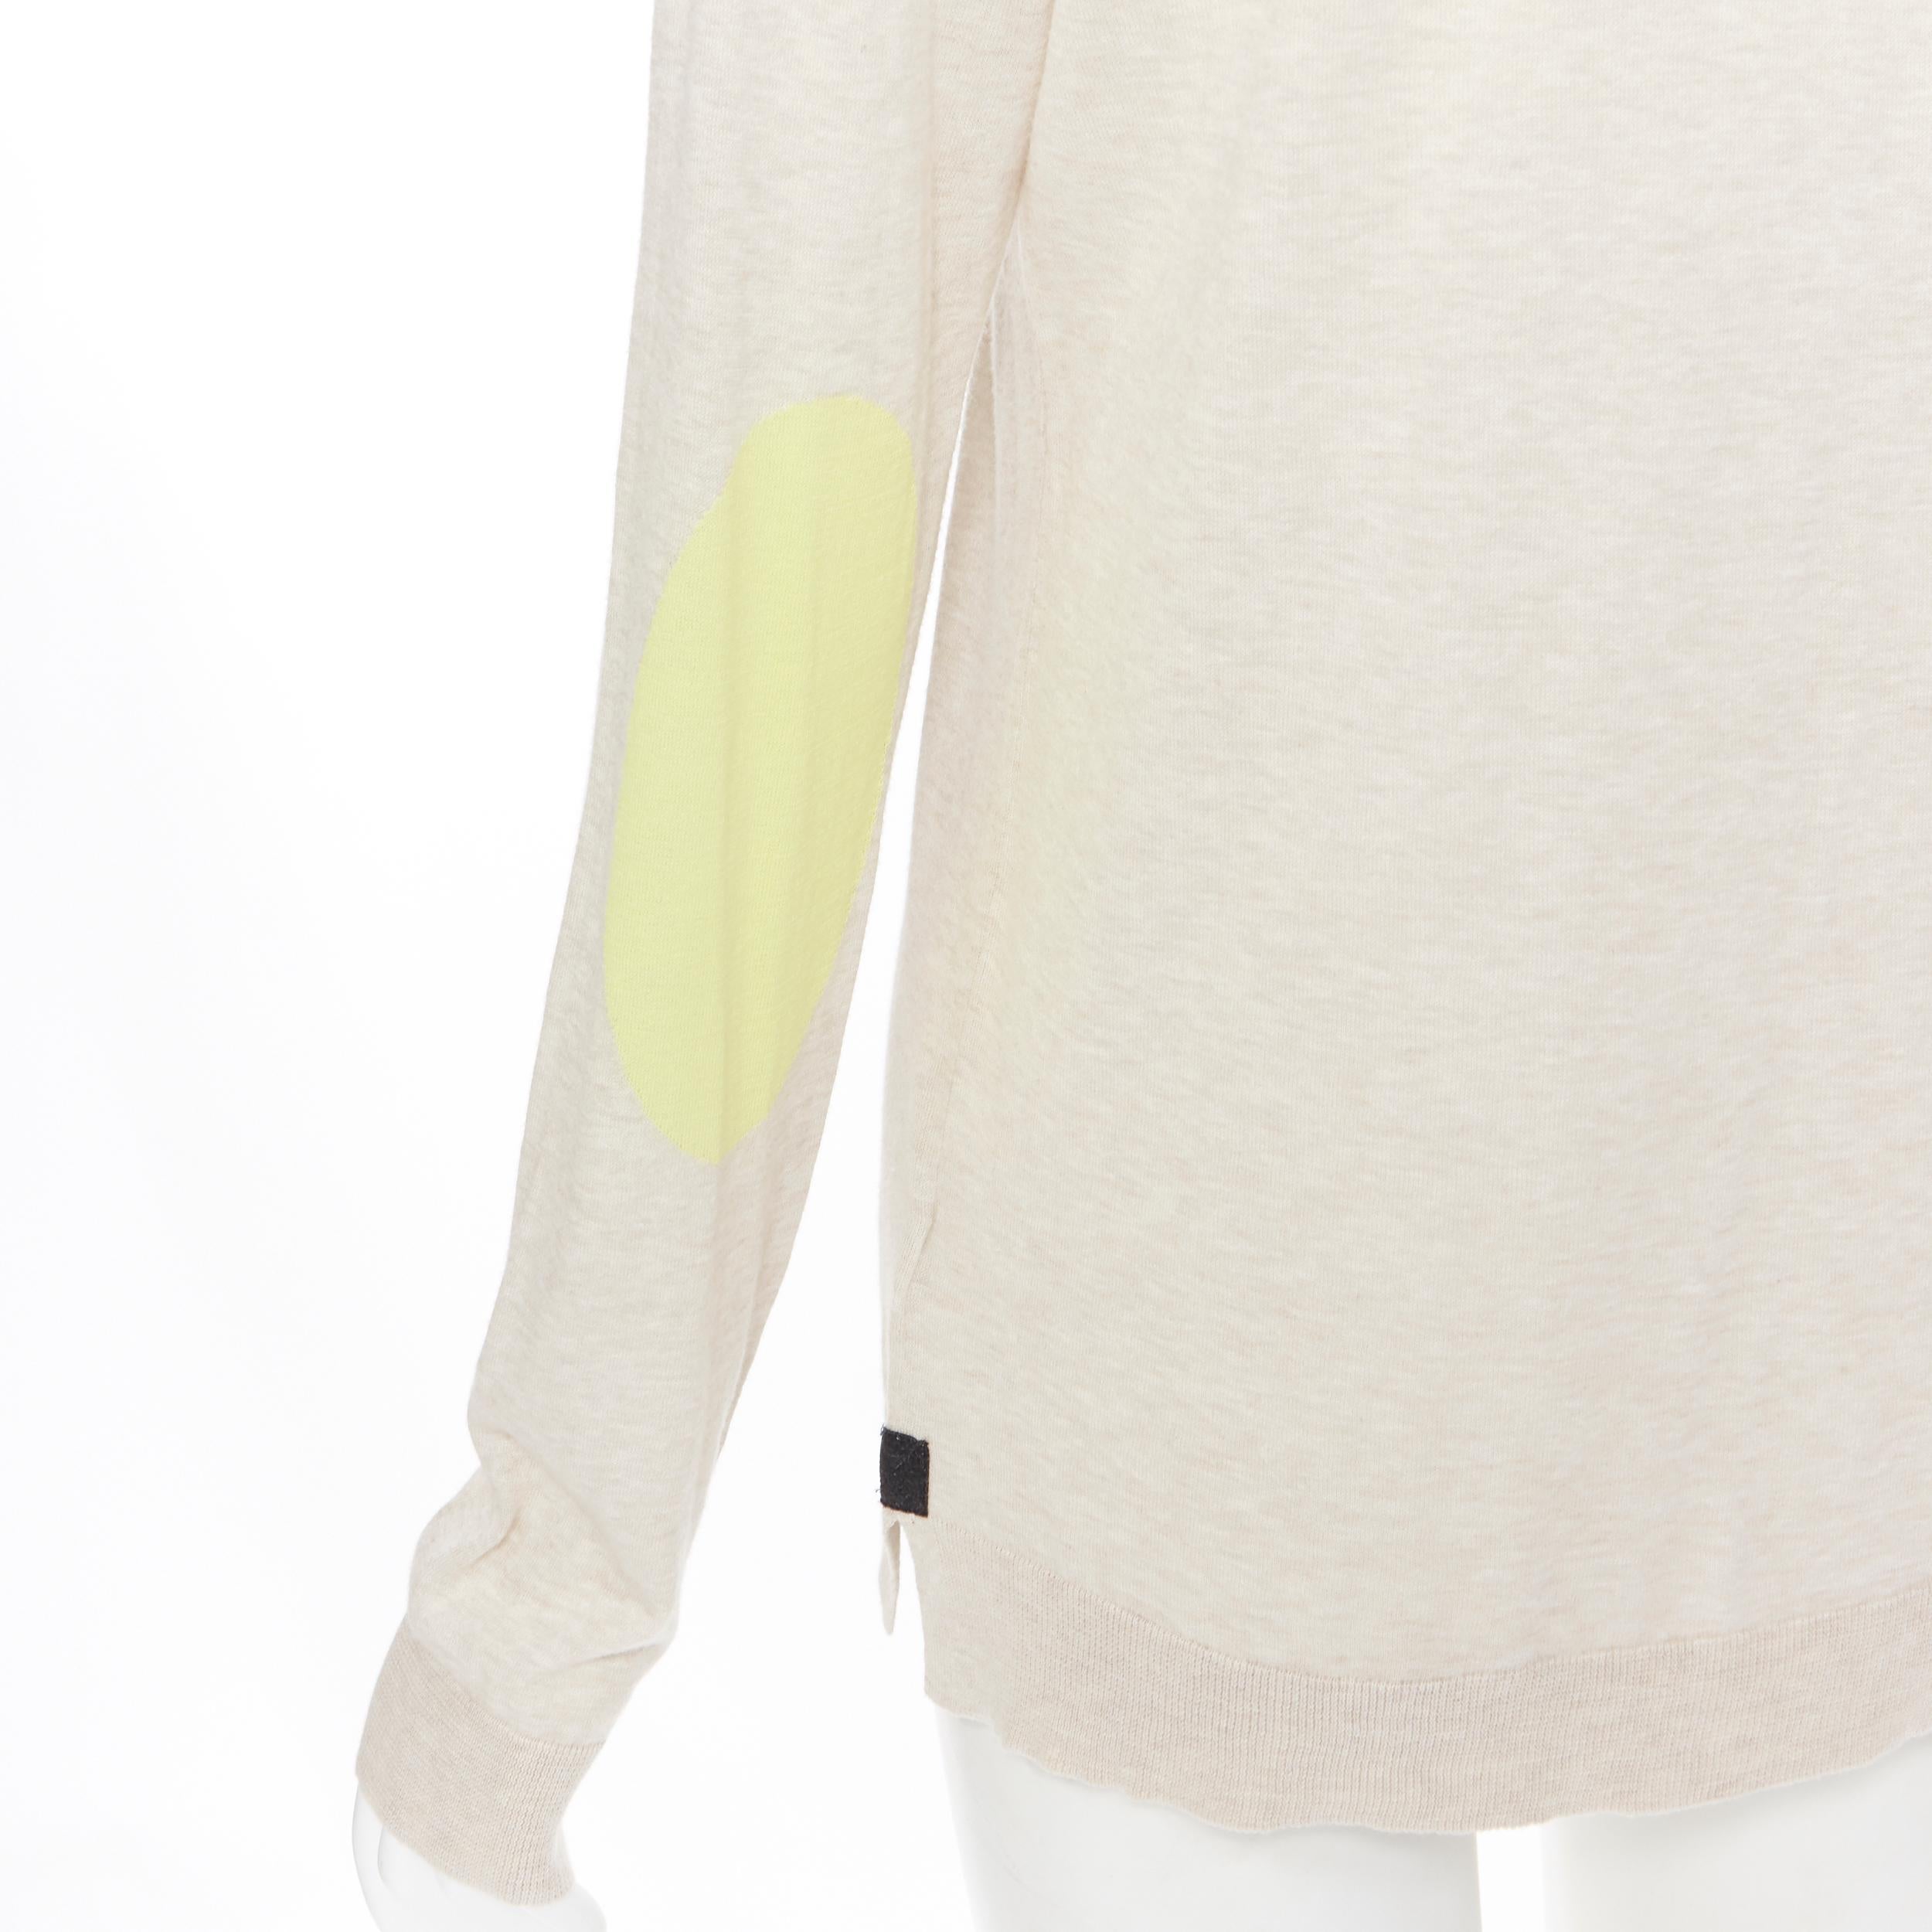 ZADIG VOLTAIRE 100% cotton beige ZV logo yellow elbow V-neck sweater S
Brand: Zadig Voltaire
Model Name / Style: Pullover sweater
Material: Cotton
Color: Beige, yellow
Pattern: Solid
Extra Detail: V-neck. ZV perforated logo at hem. Black leather